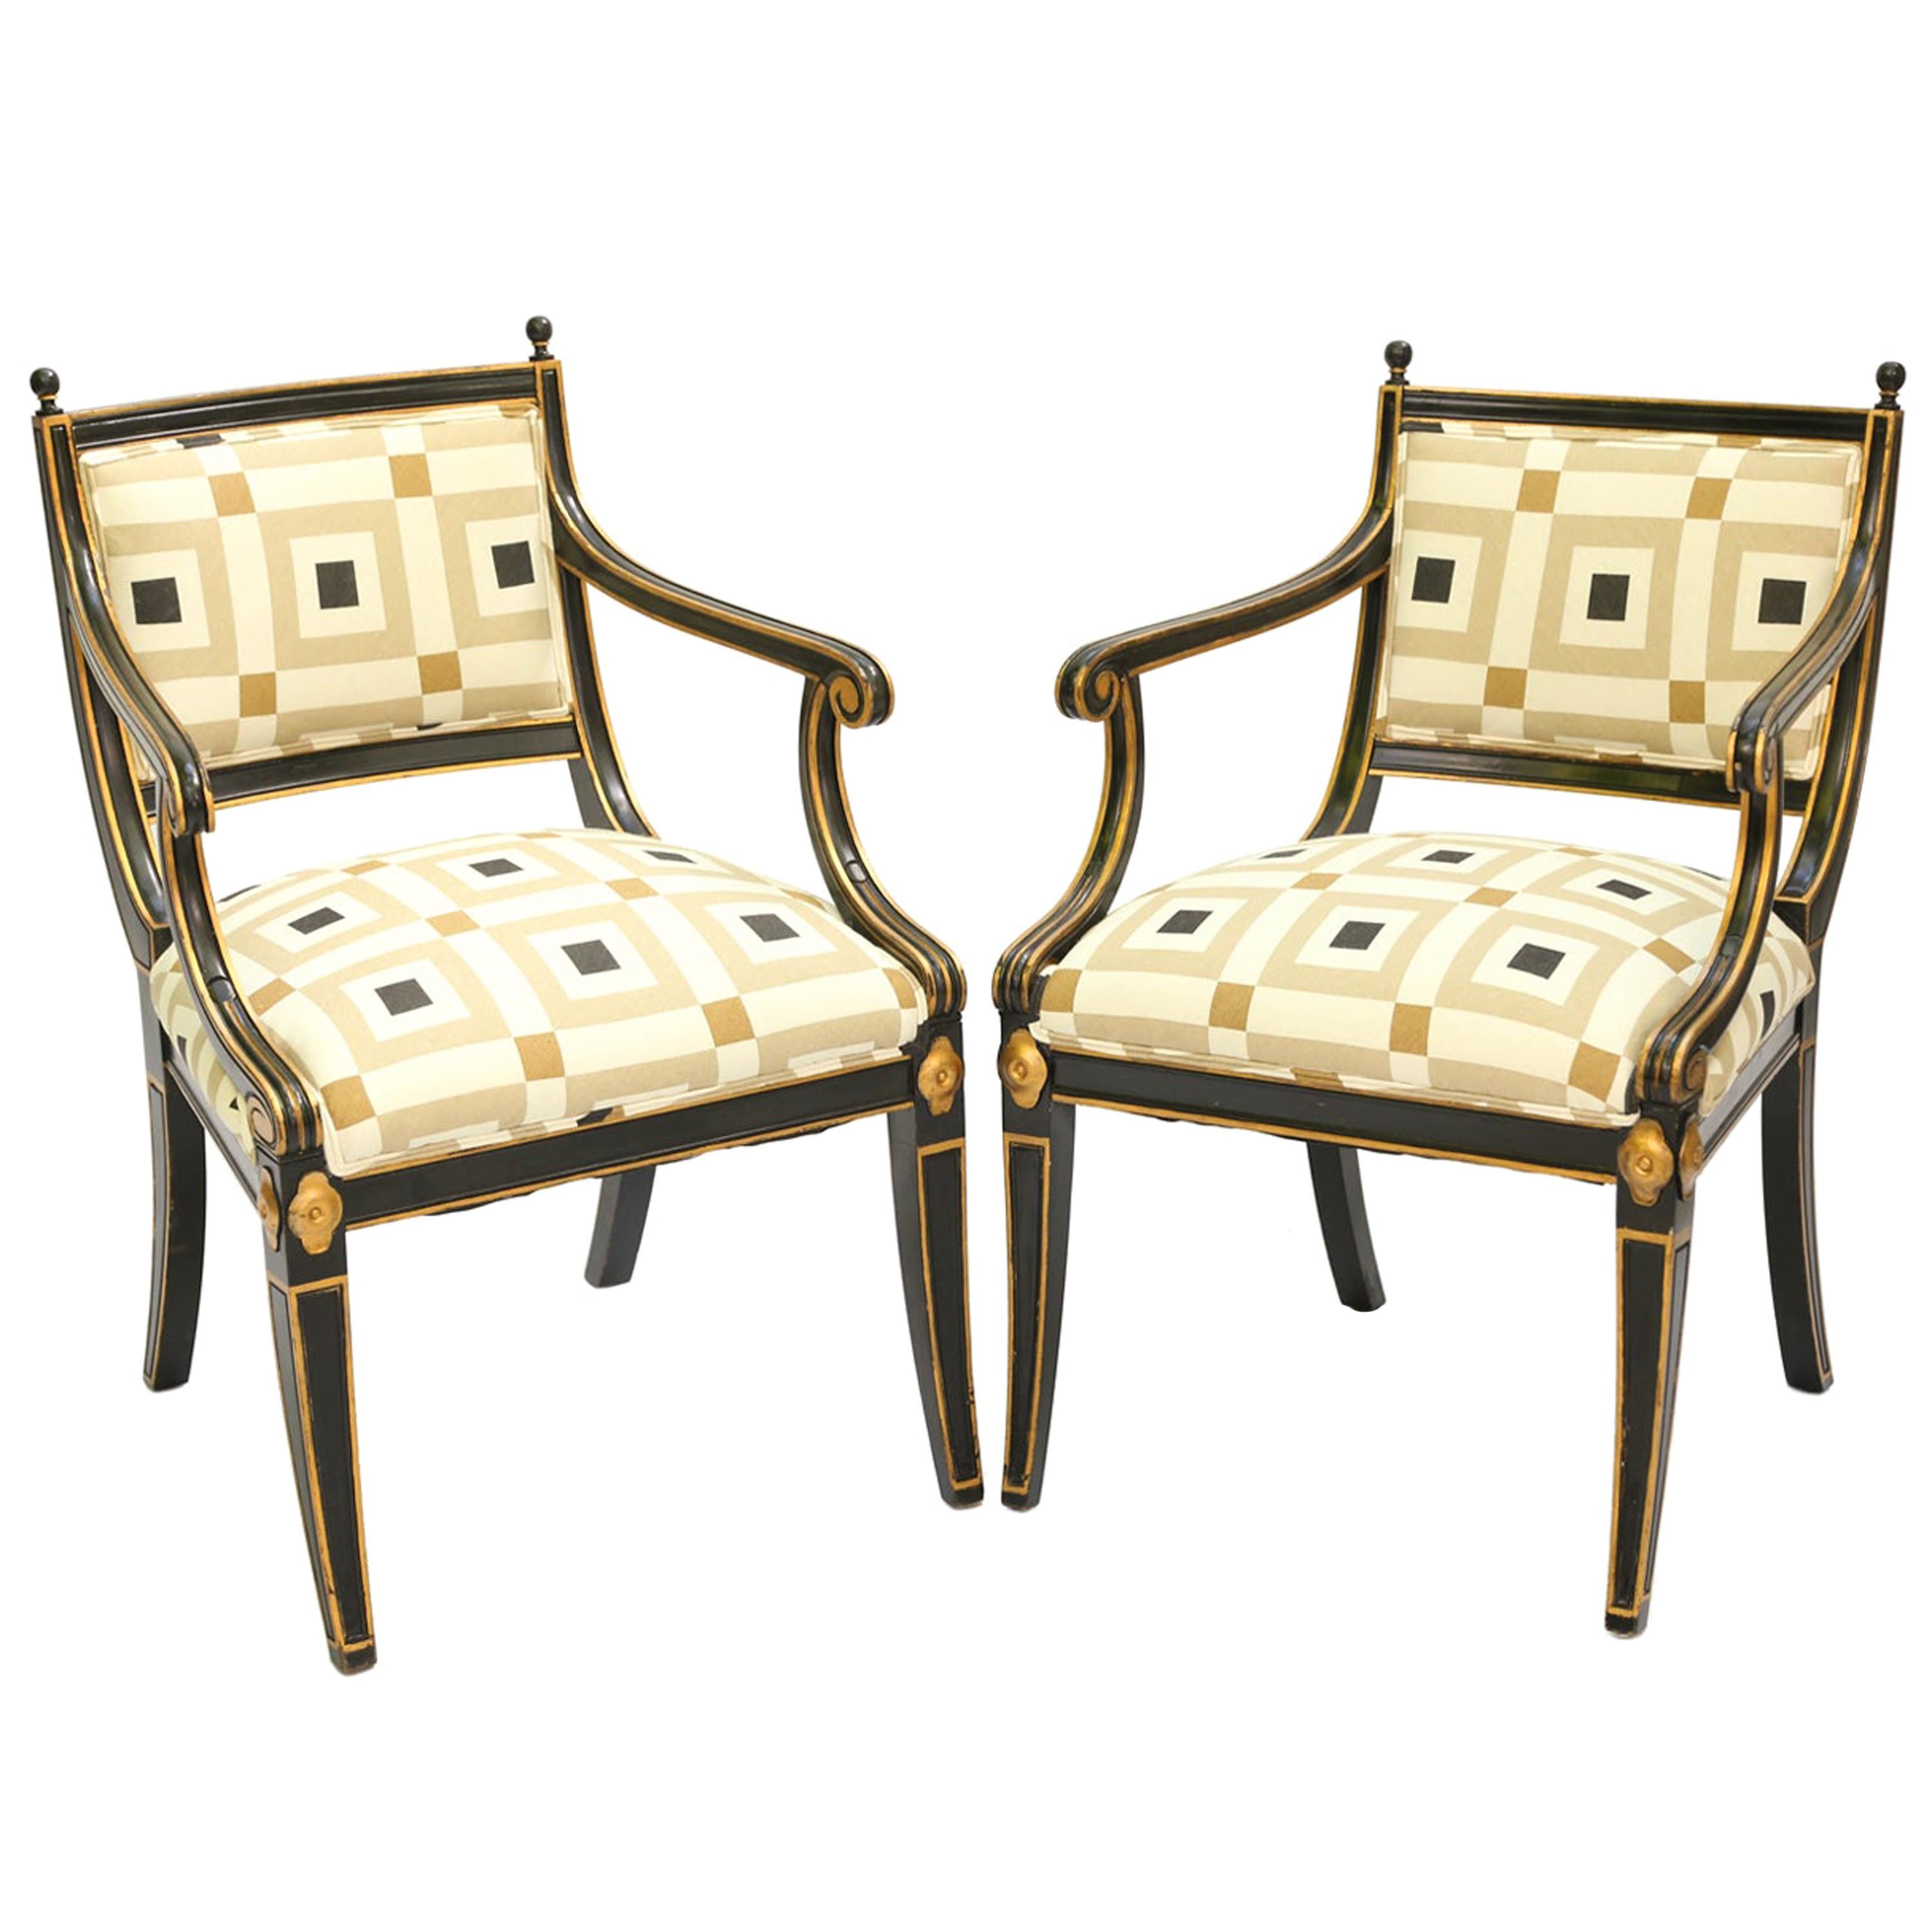 Pair of Black Painted and Parcel-Gilt Regency Style Armchairs